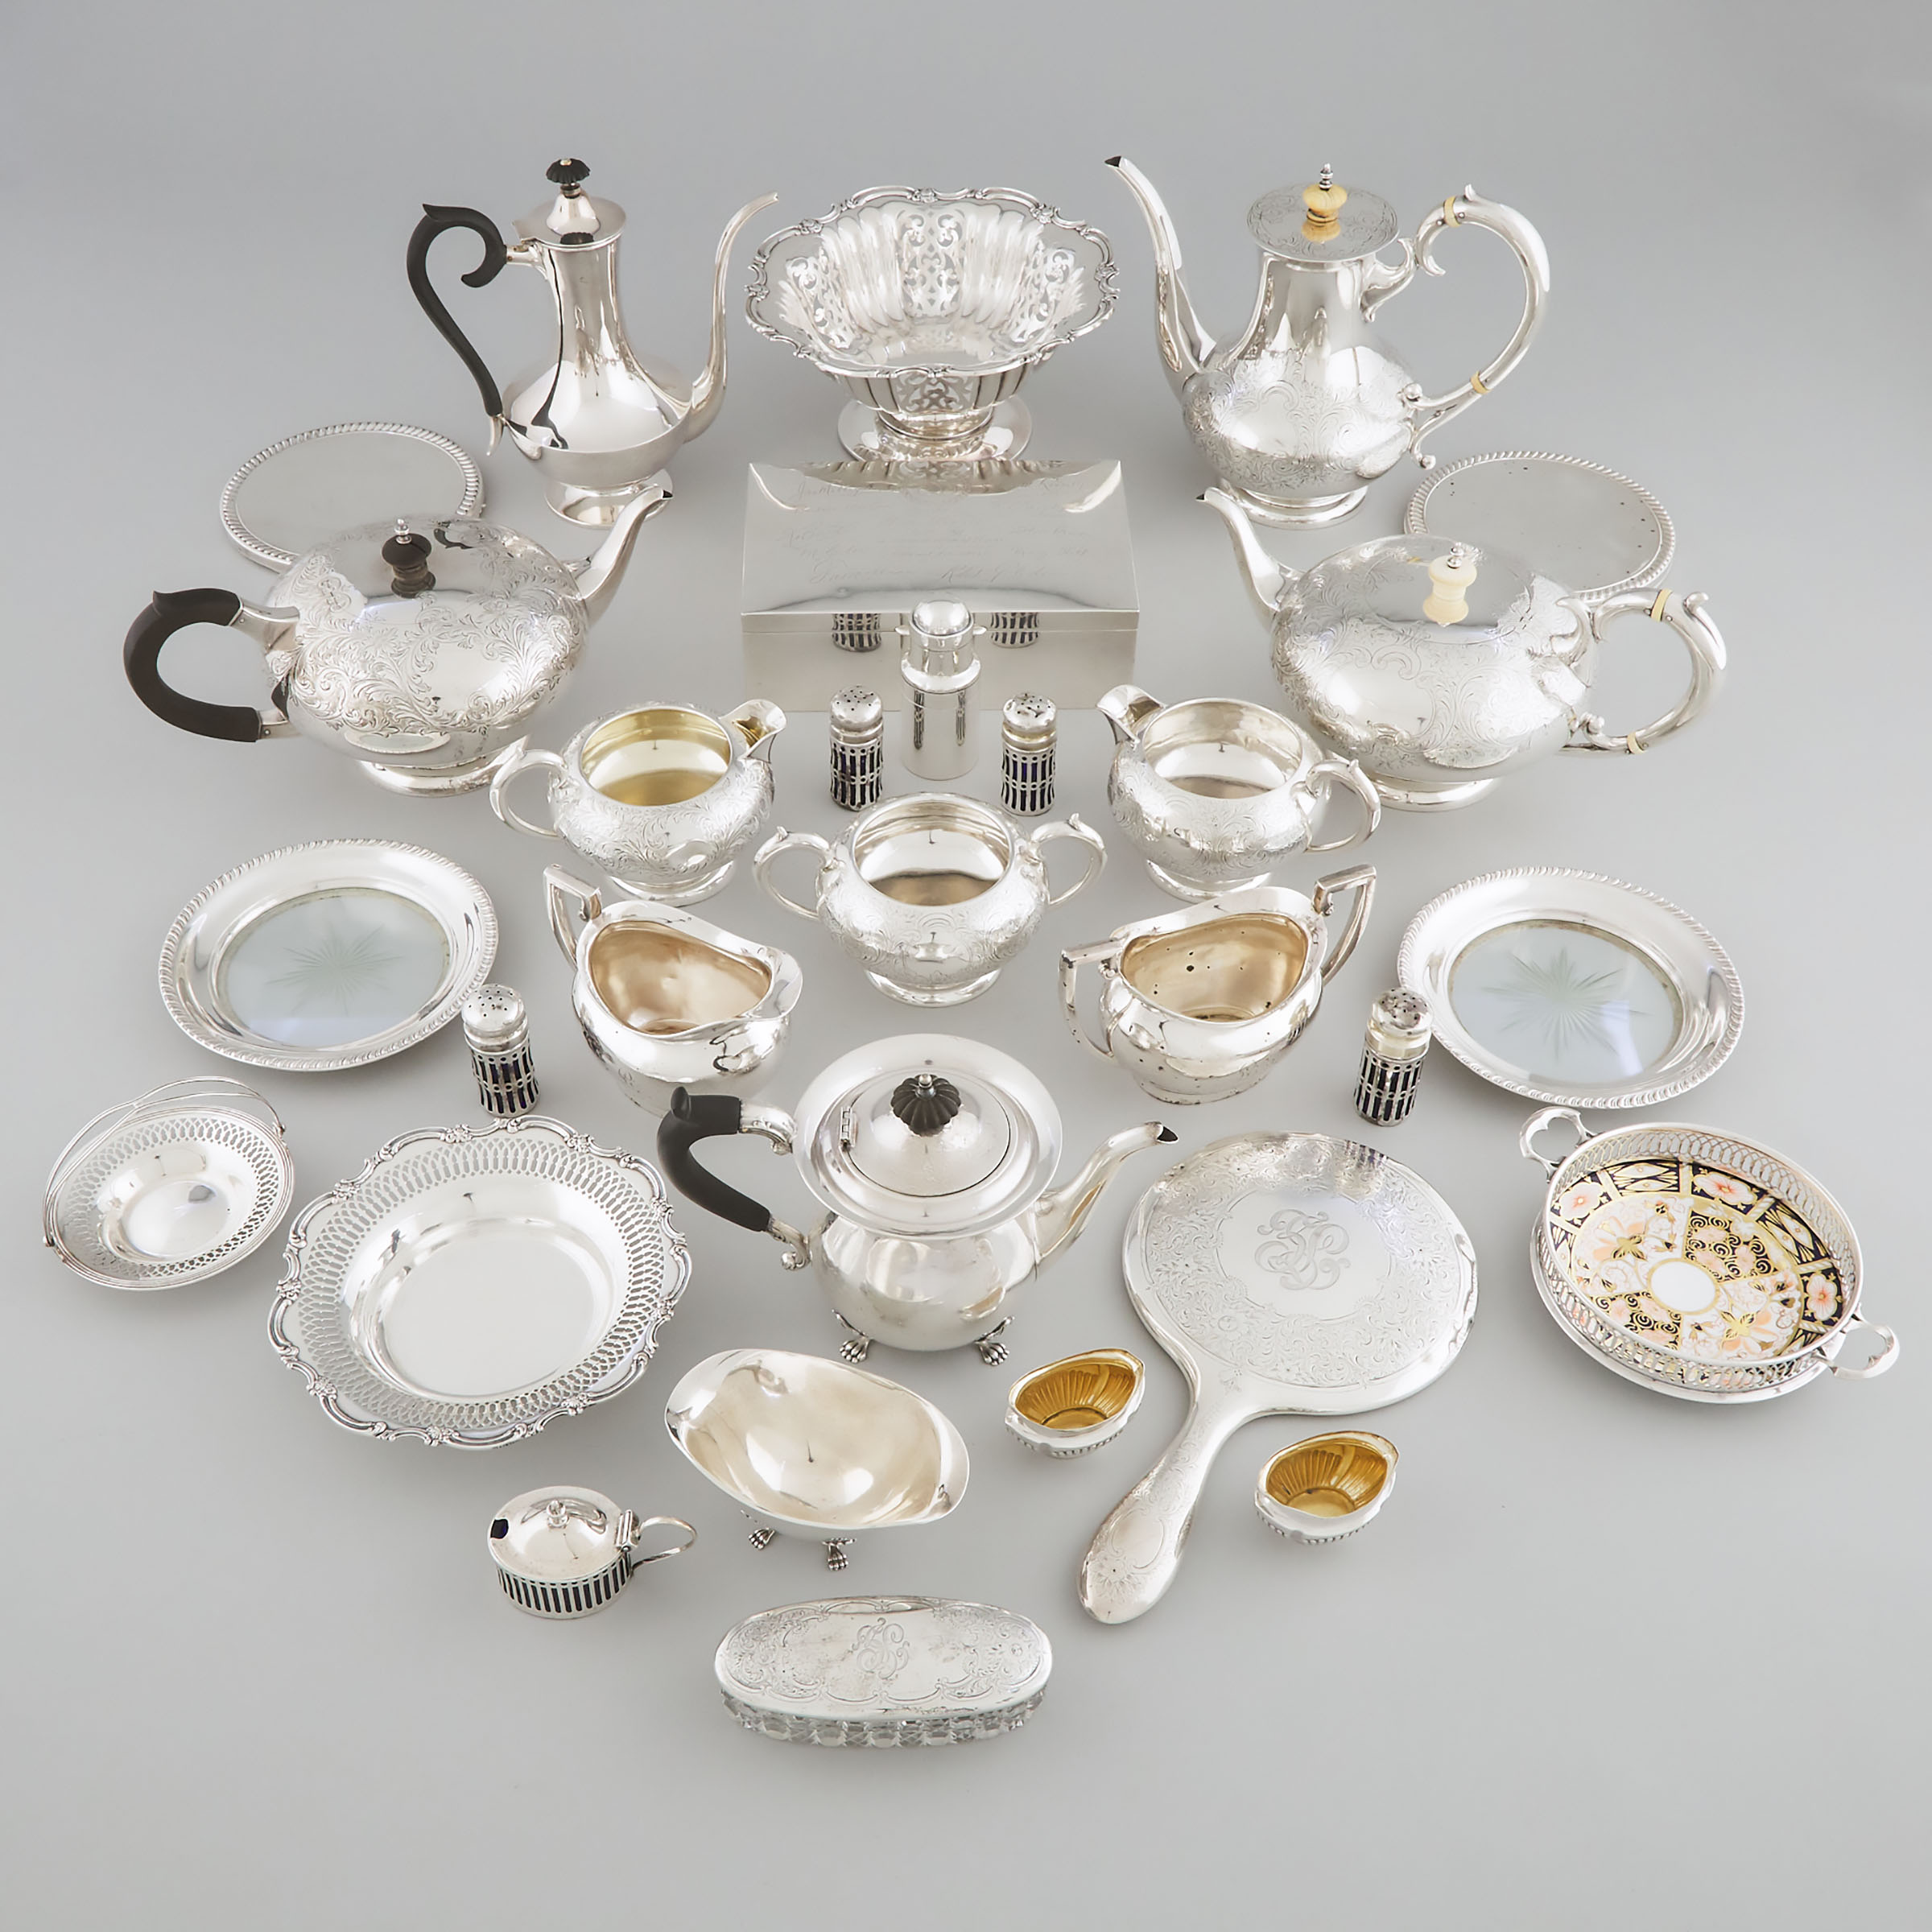 Group of Canadian Silver, Roden Bros., Toronto, Ont., 20th century